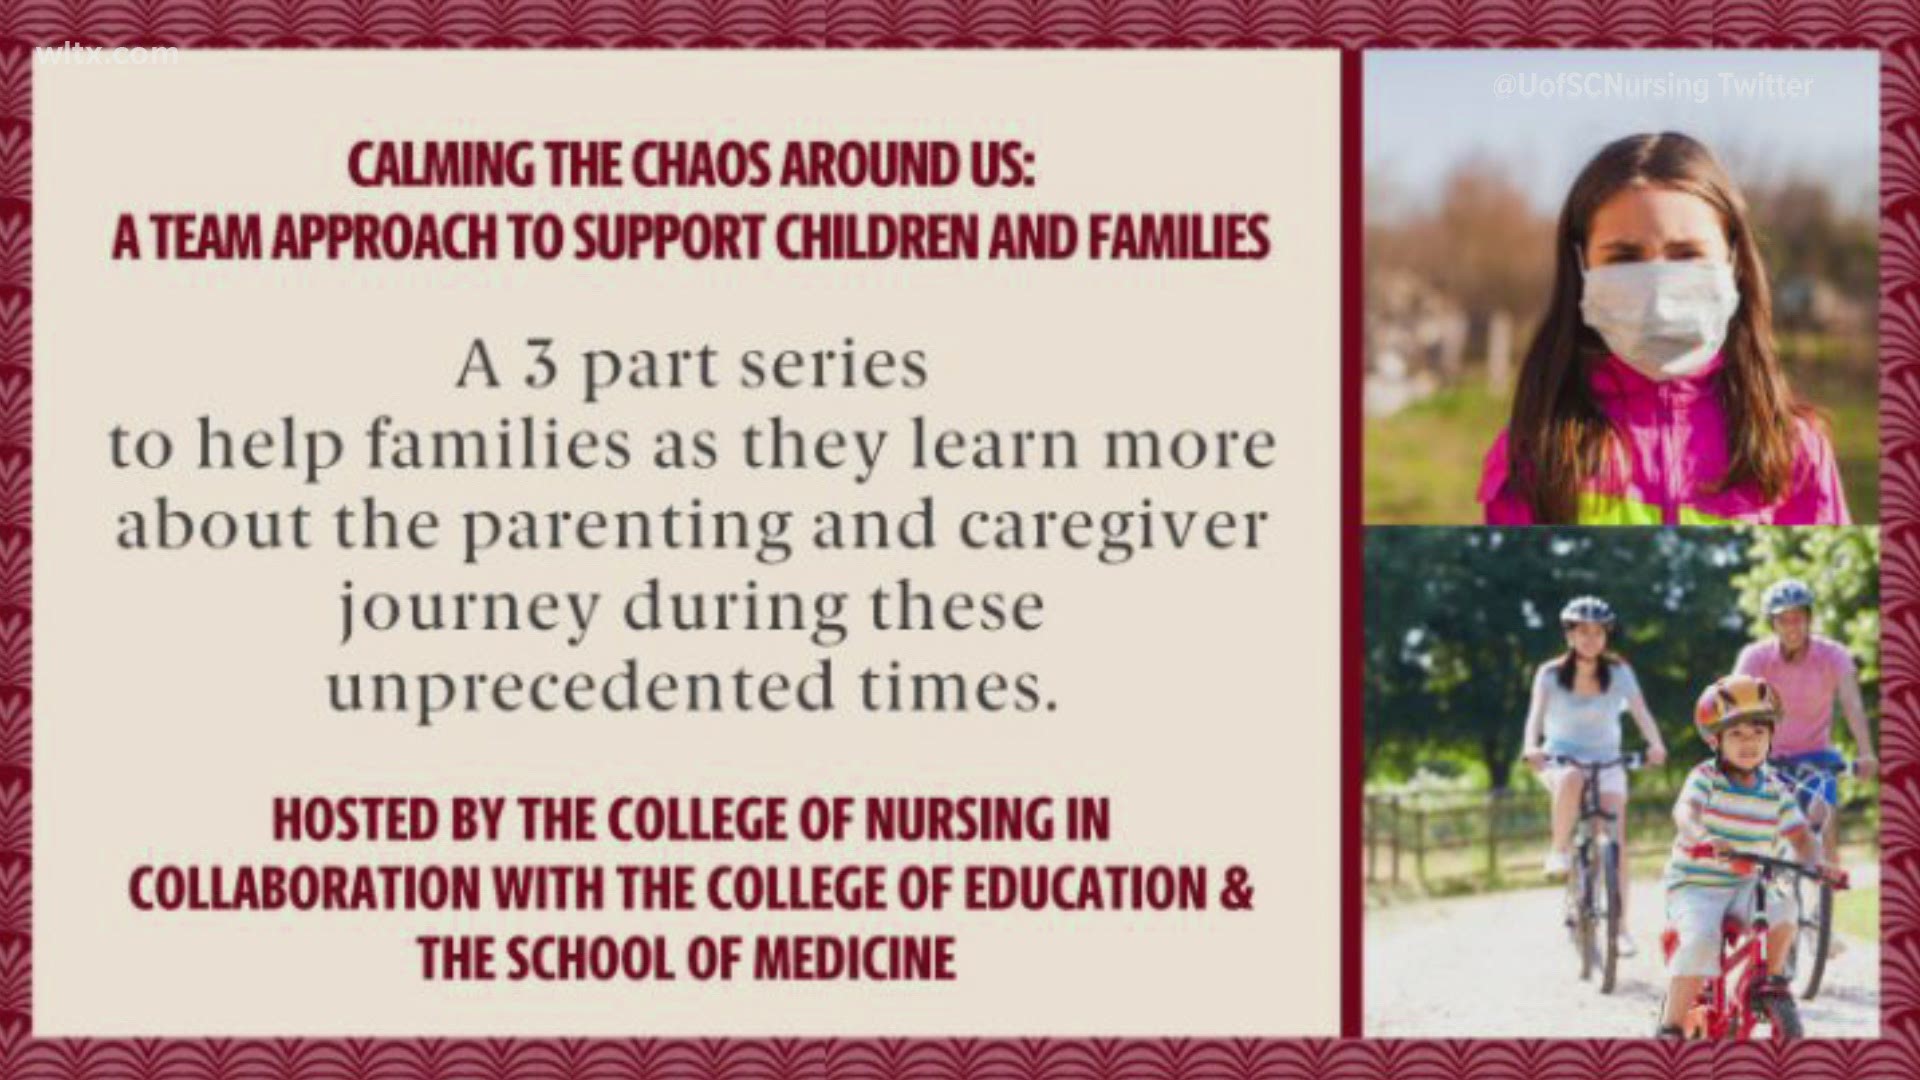 USC has launched a 3-part video series on the topic of children with anxiety & COVID.